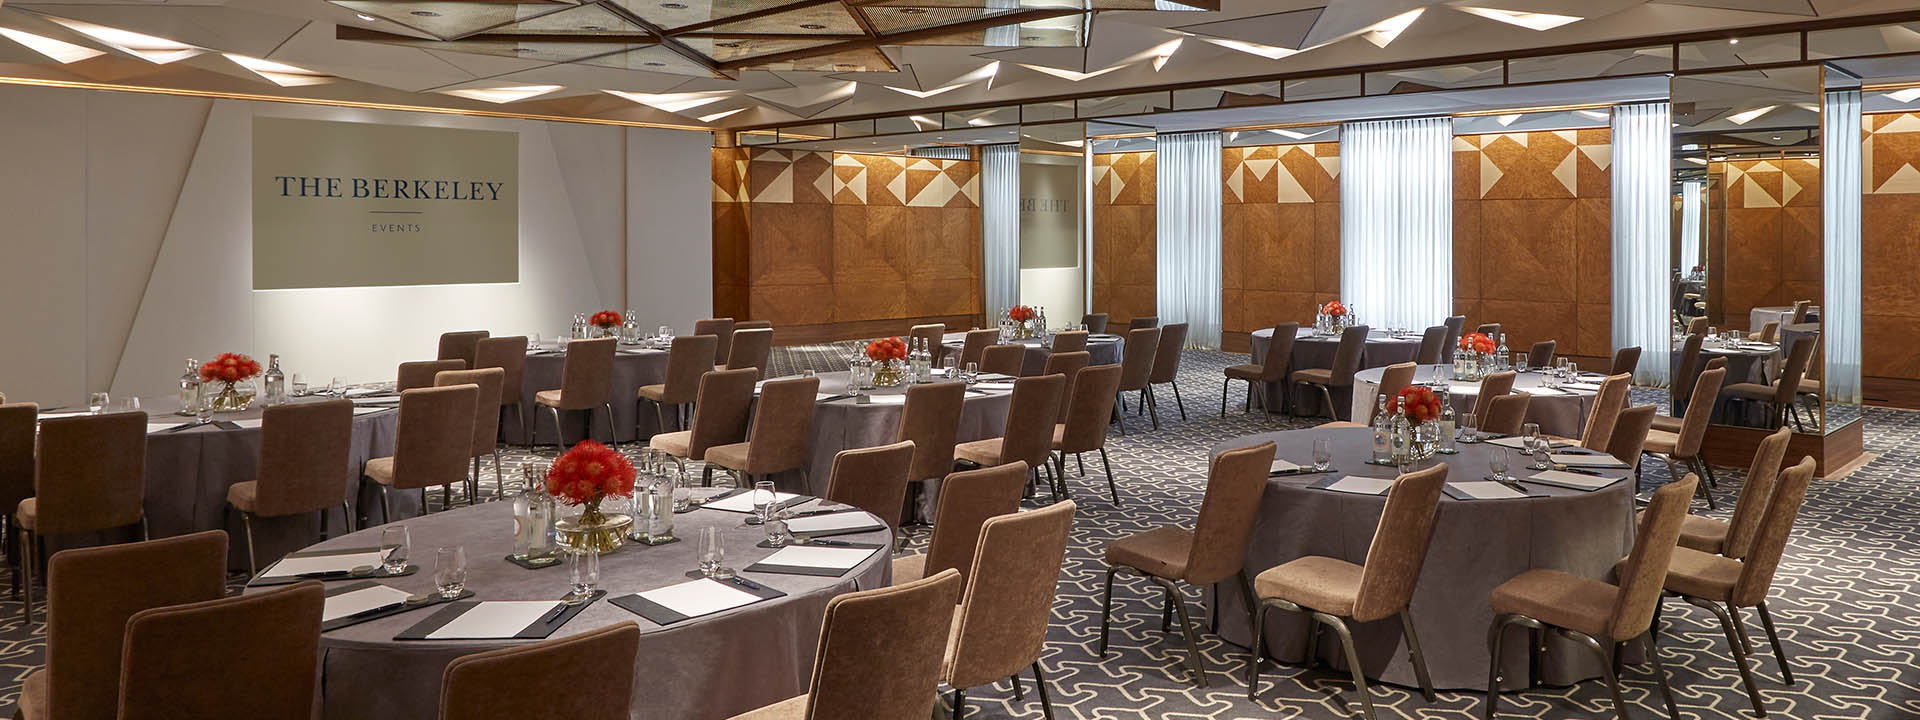 The event space, the Ballroom at The Berkeley, with its innovative interior design is spacious and great for conferences.